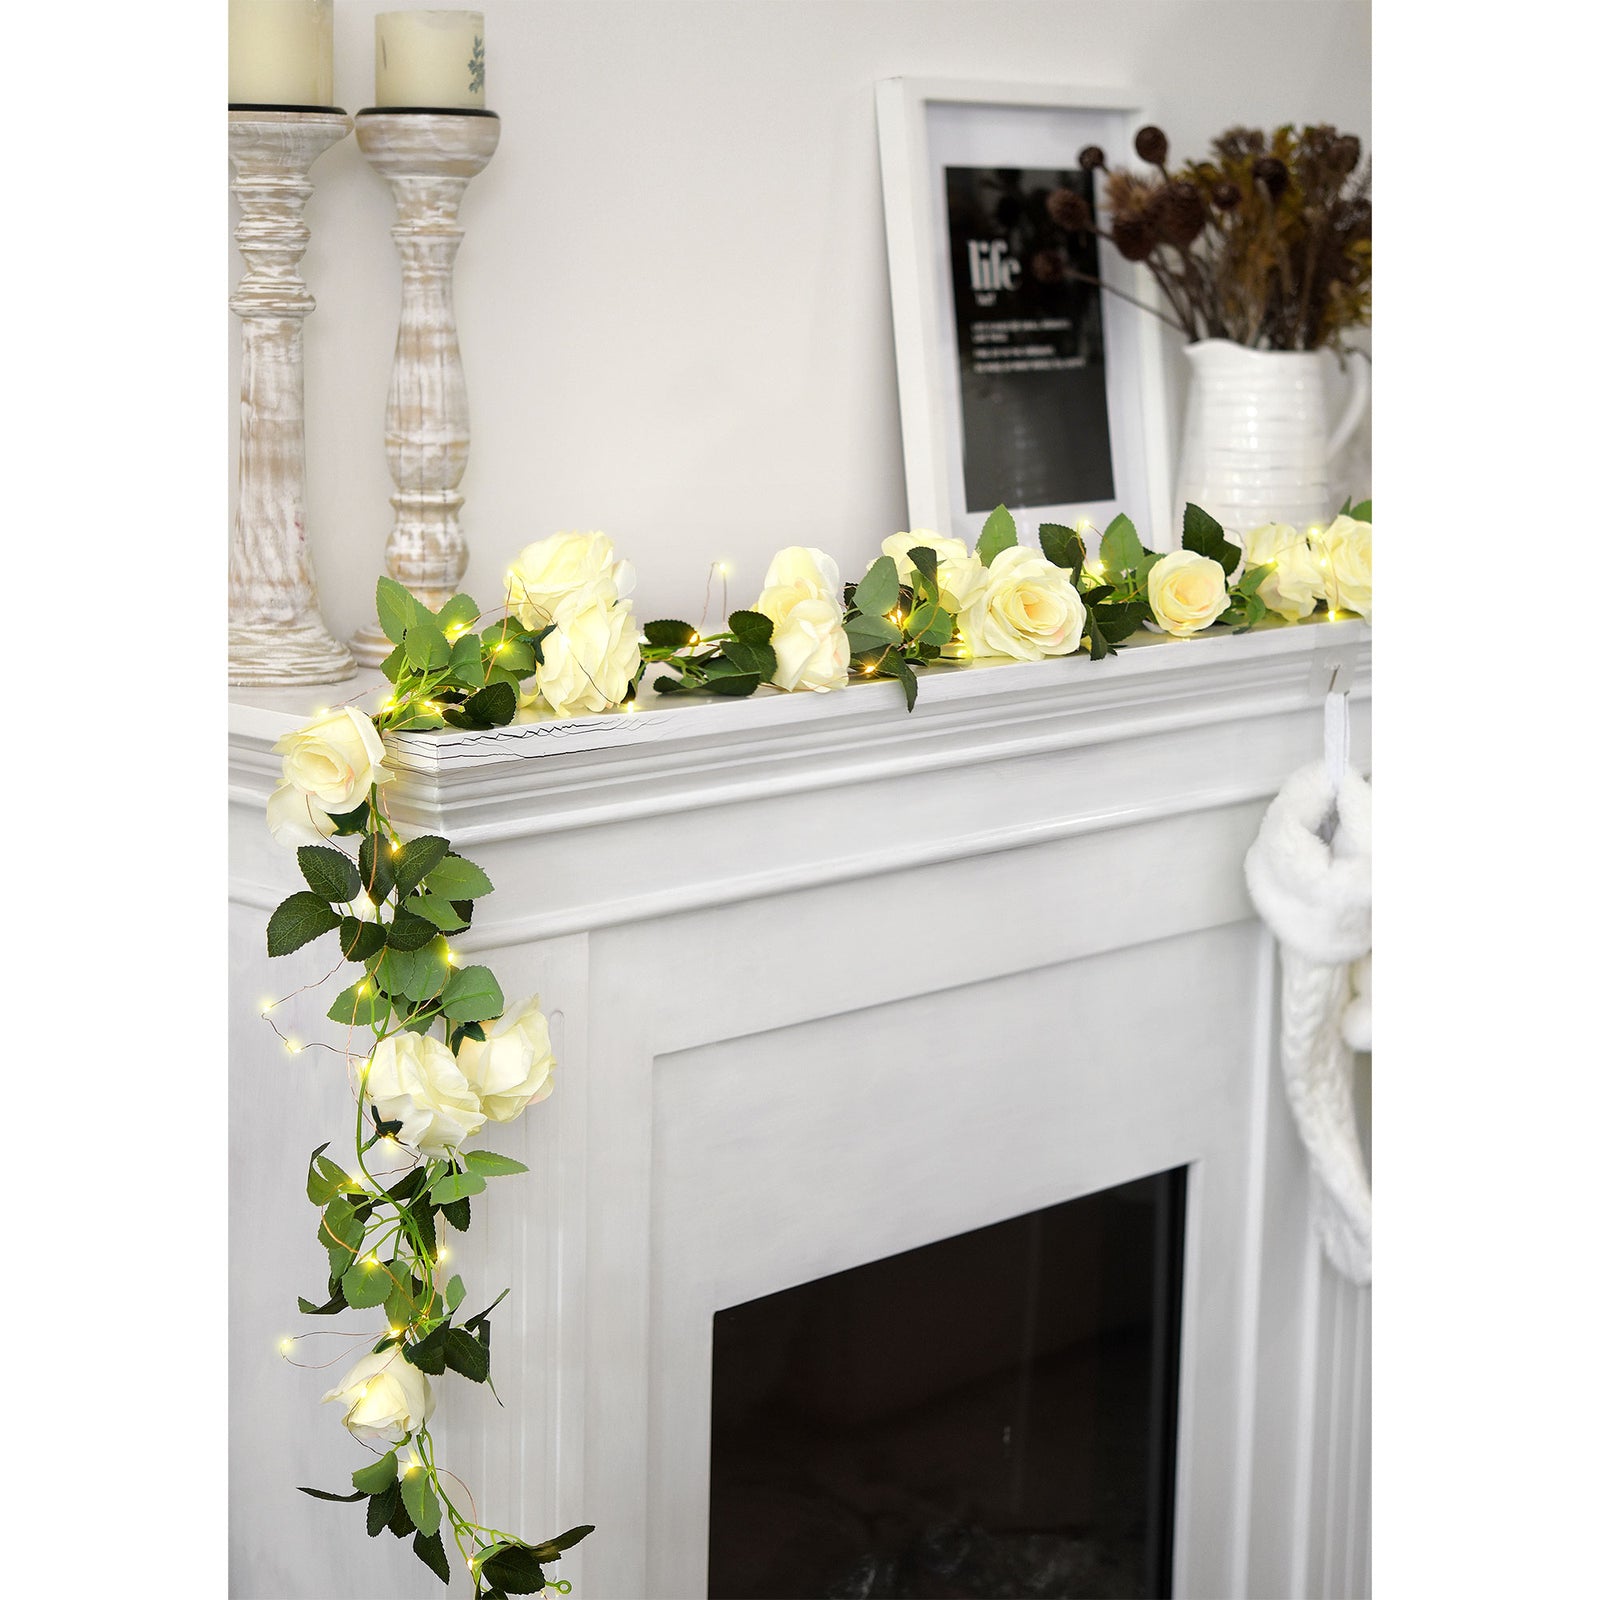 14 Ft 2 Pack Cream White Rose Silk Flower Garland Artificial Flowers Decoration Hanging Floral with 33 feet String Lights